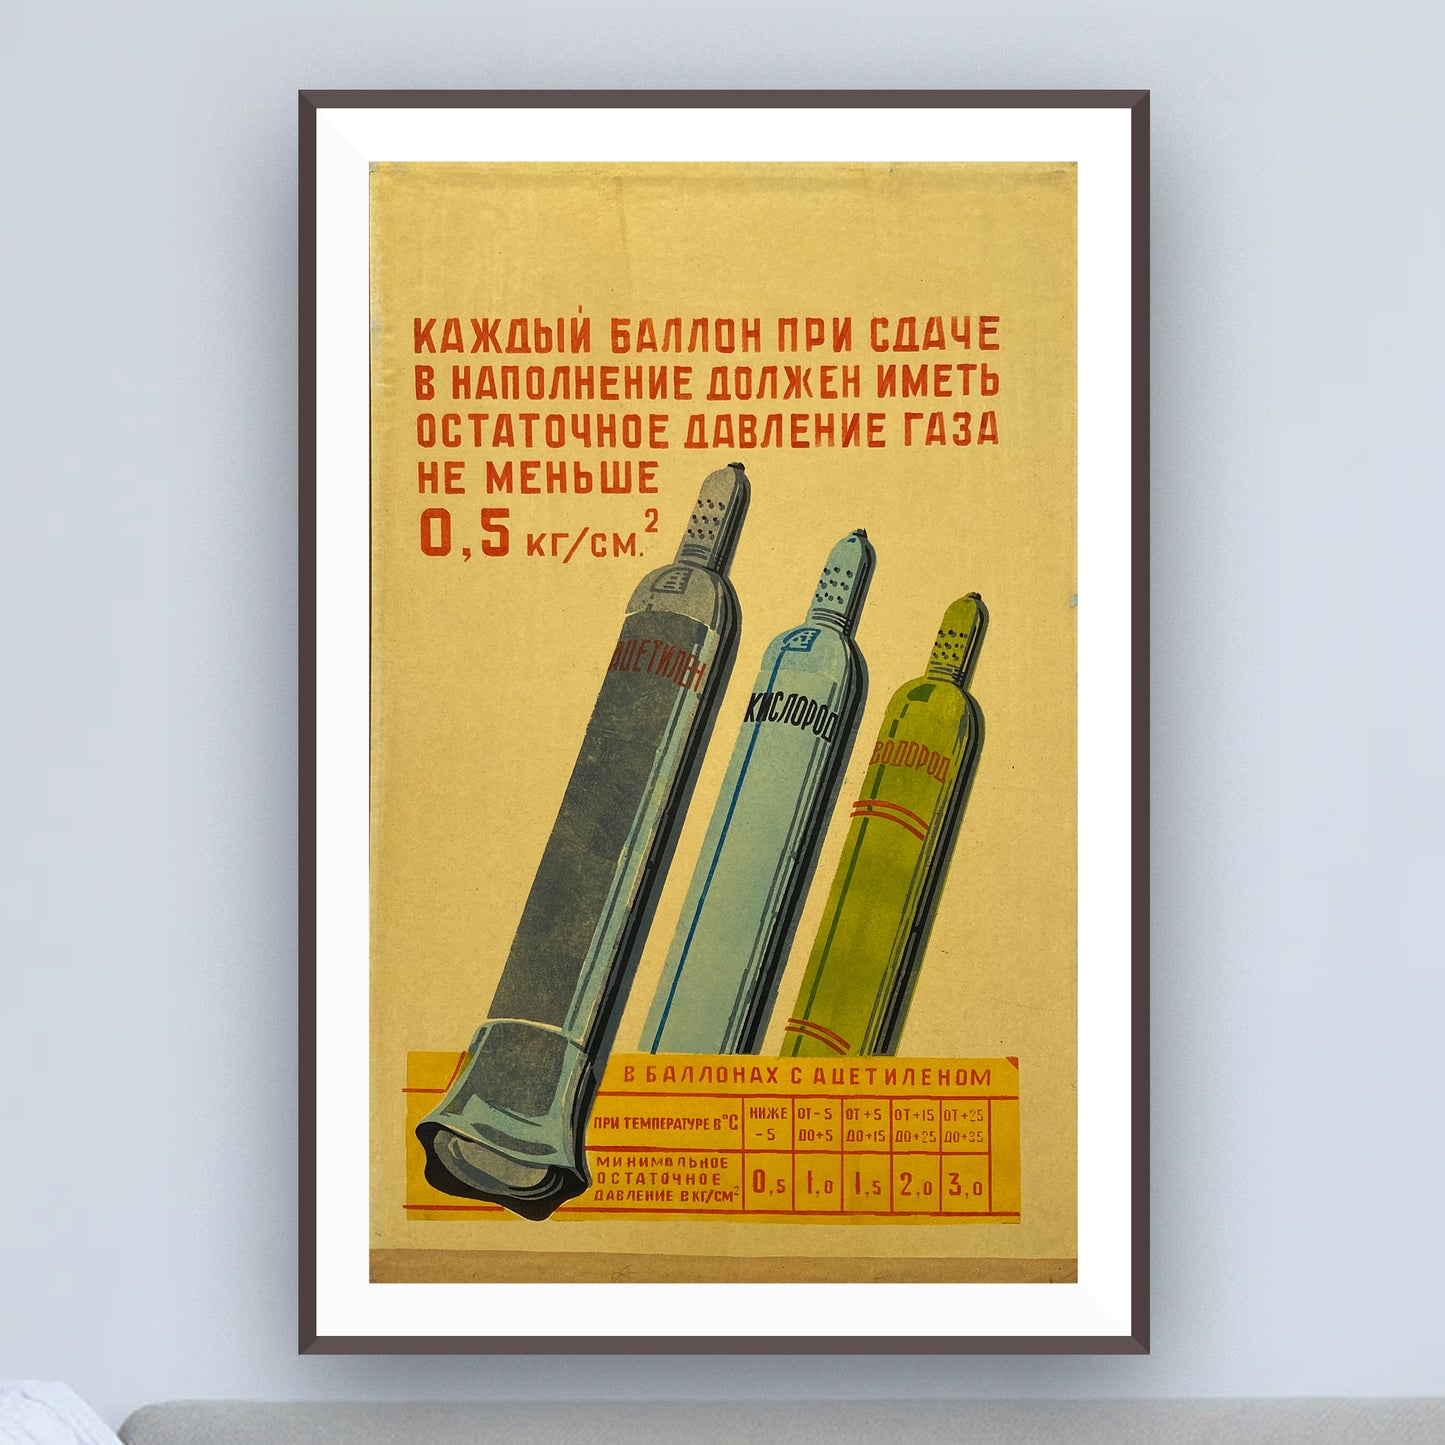 Poster, "Each cylinder must have a residual gas pressure of at least, 0.5 per m2", Worker safety VEF Riga, Latvian SSR, 1960s